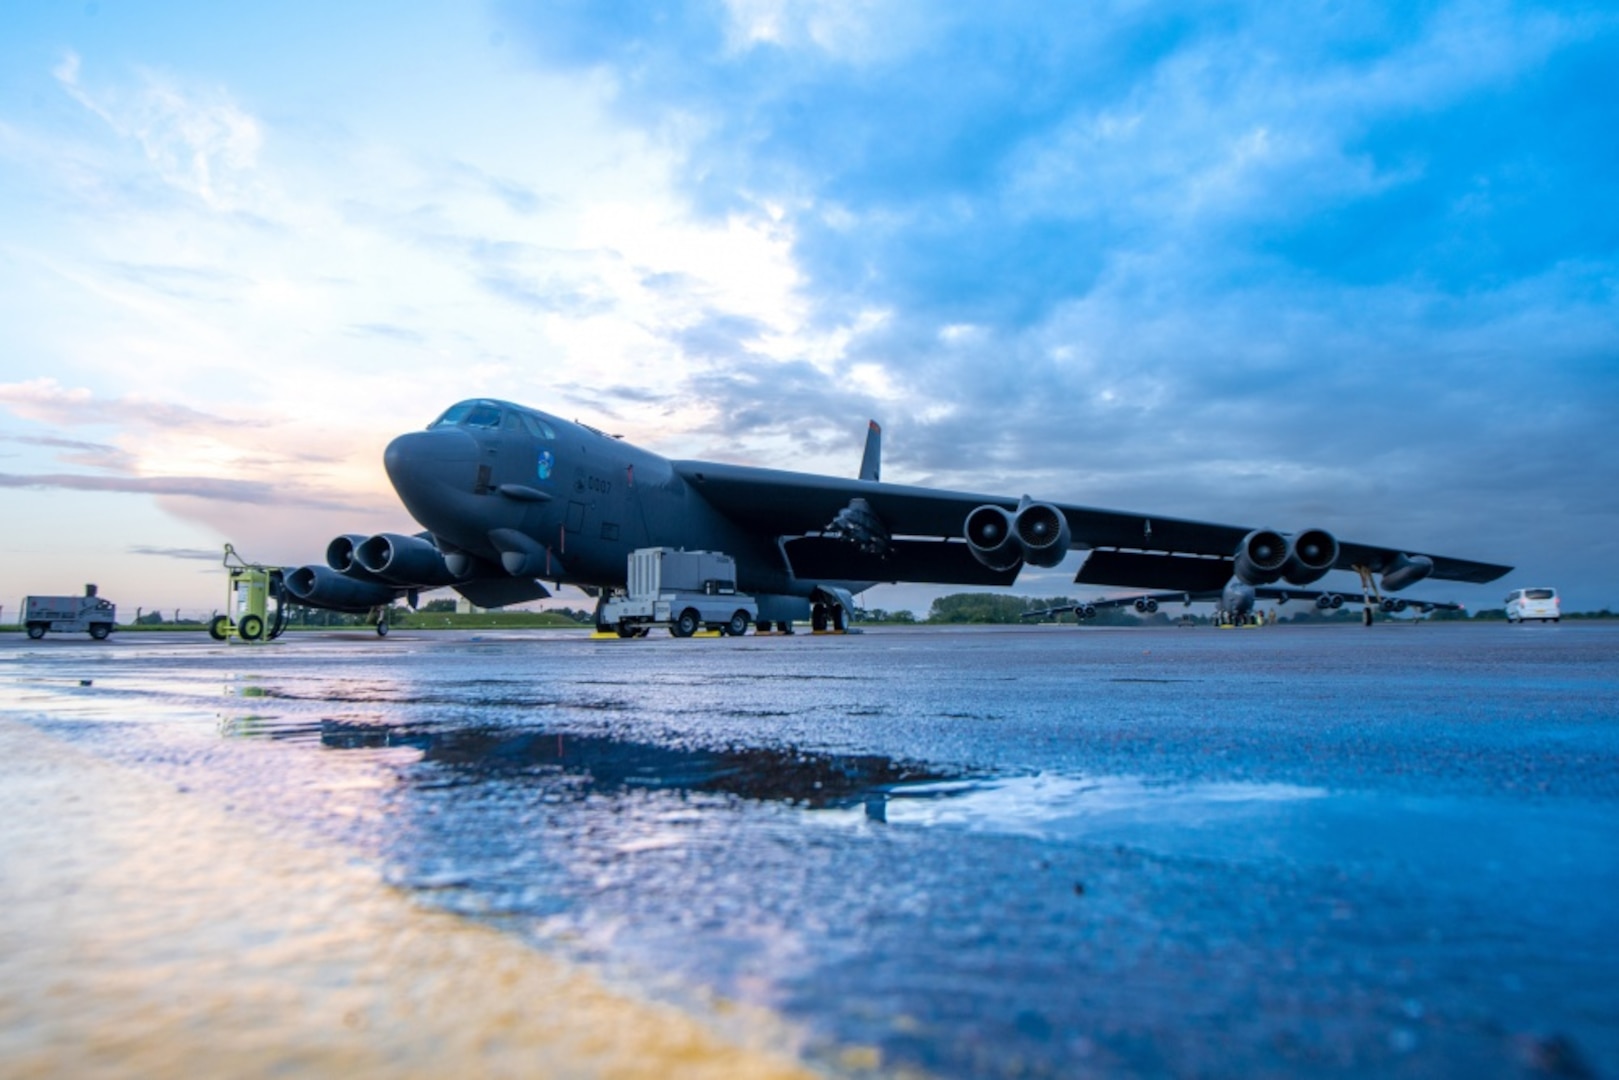 A B-52H Stratofortress assigned to the 23rd Bomb Squadron at Minot Air Force Base, N.D., is parked on the flight line at RAF Fairford, England, Aug. 28, 2020. The U.S. remains committed to our allies and partners and will decisively respond to threats in spite of the current COVID-19 crisis.